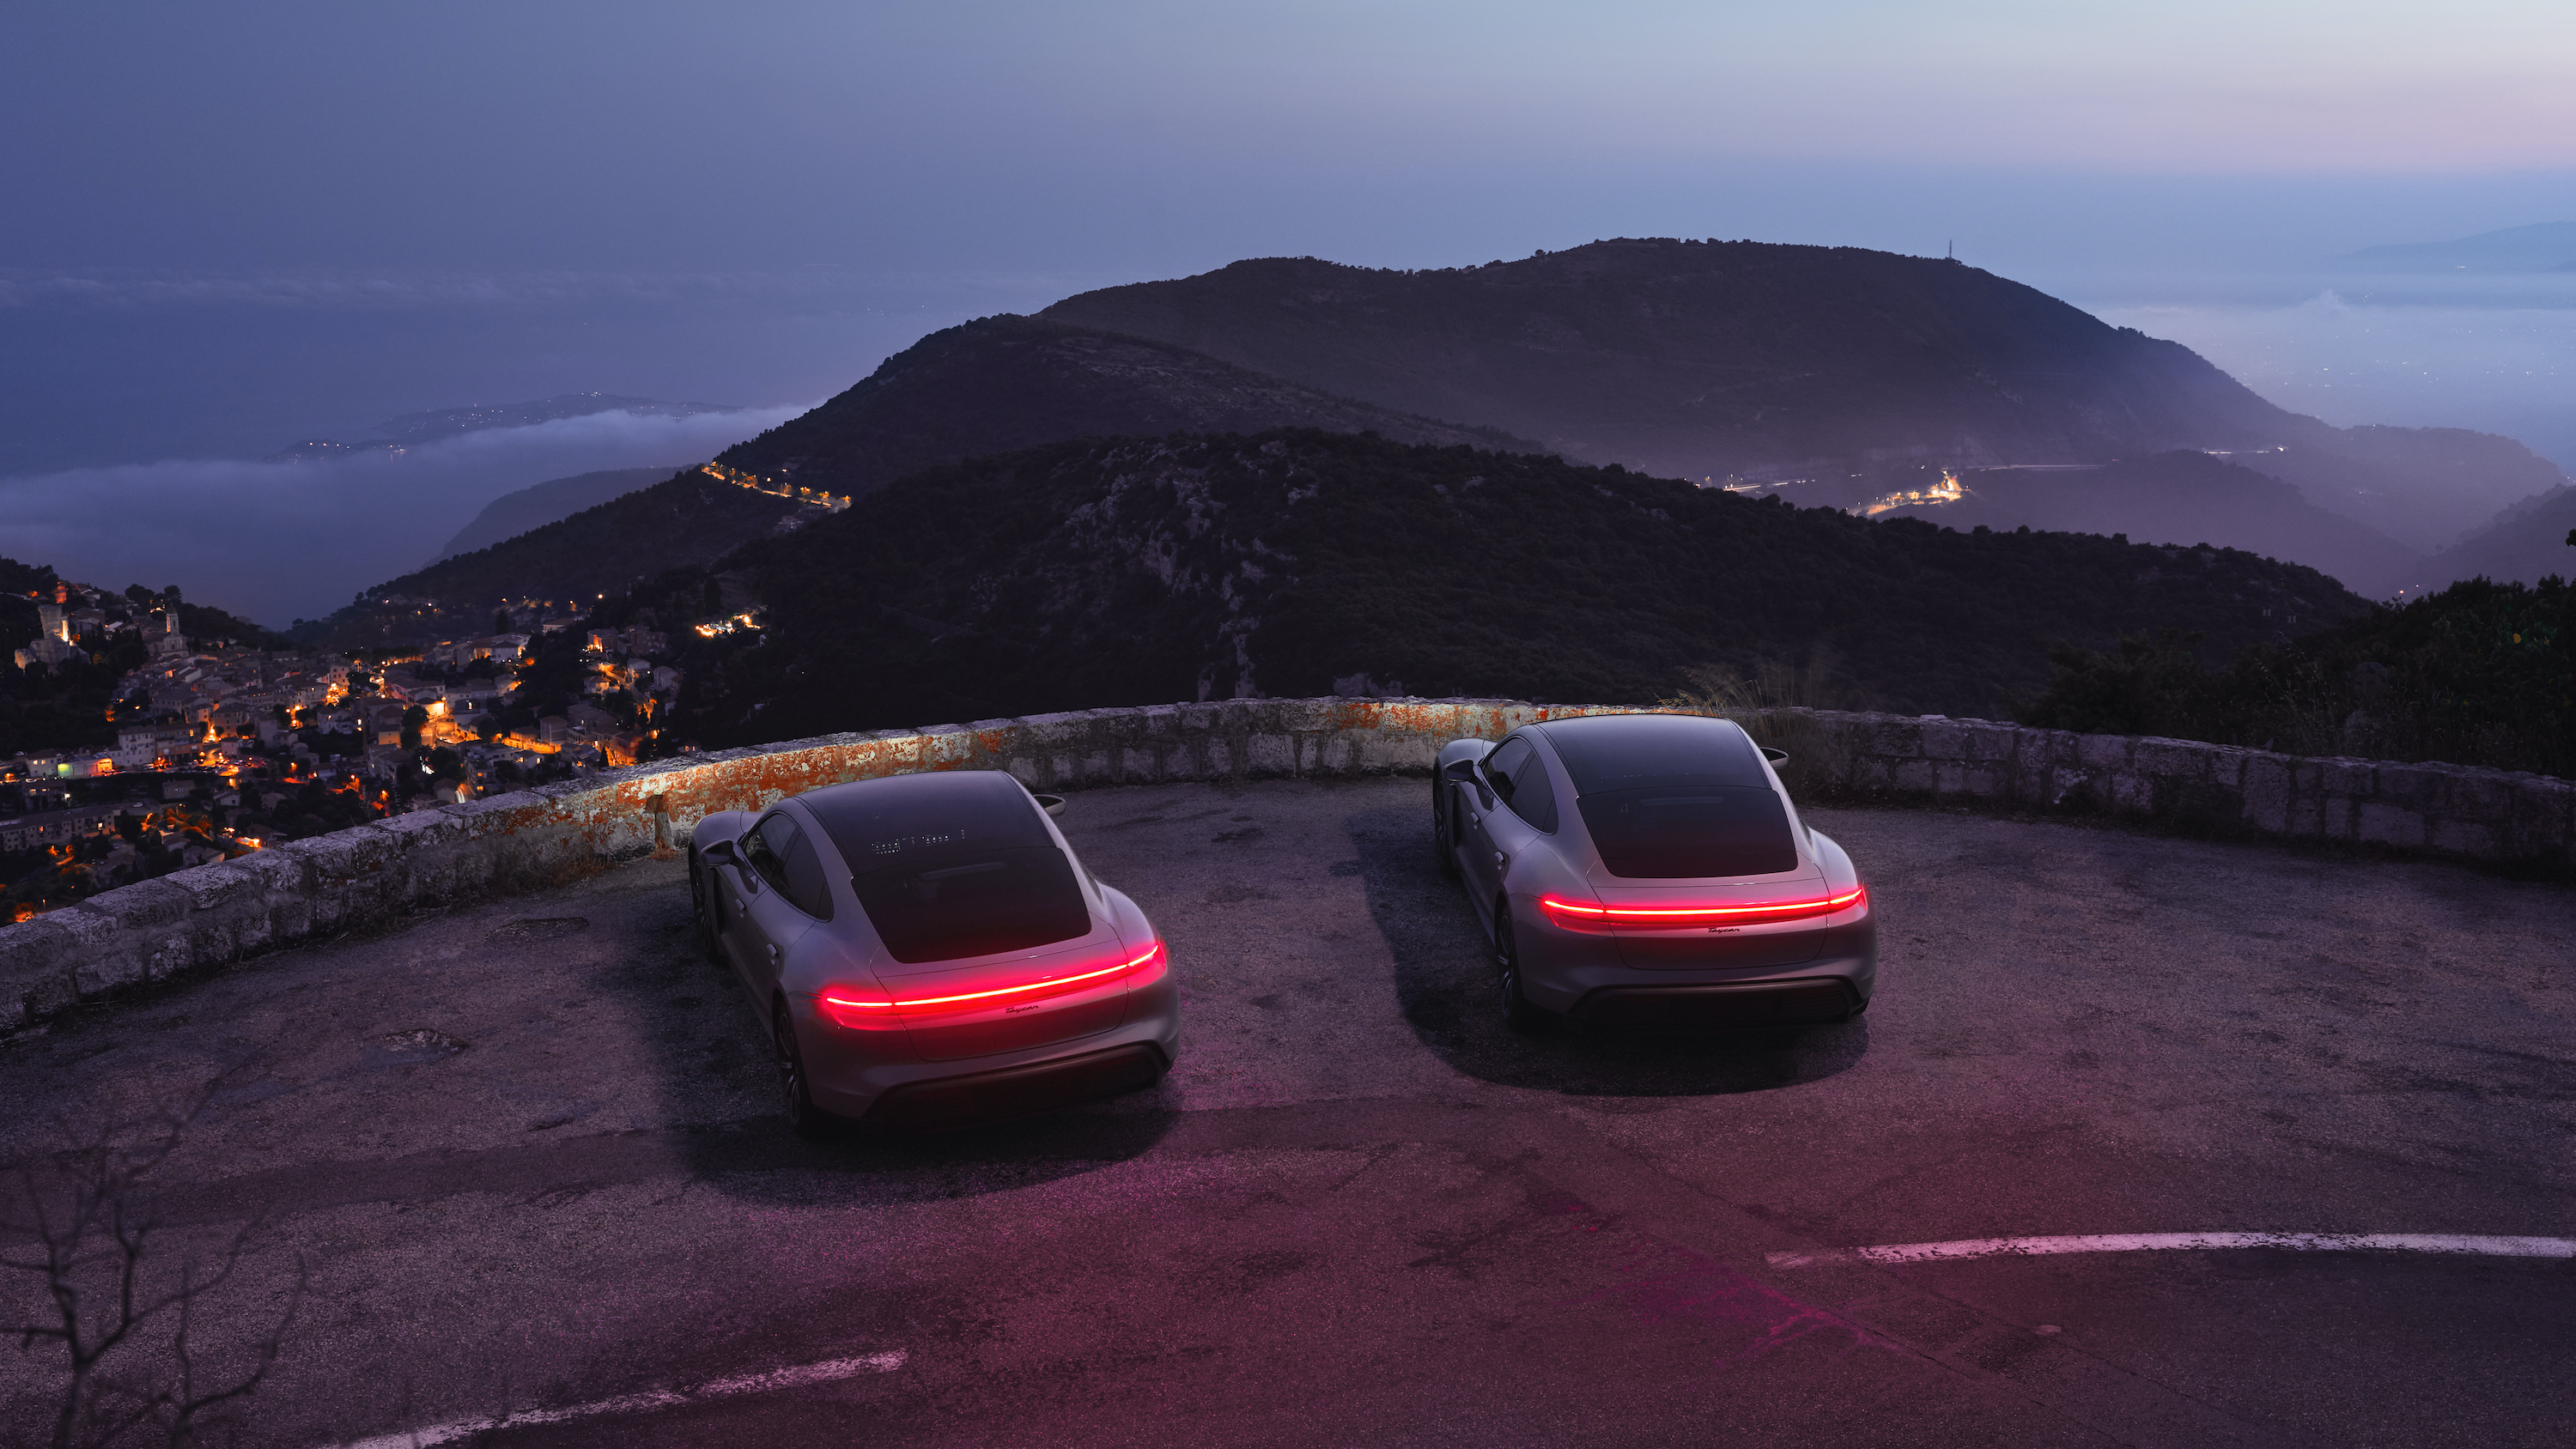 Two Porsche Taycan cars overlook a town at night